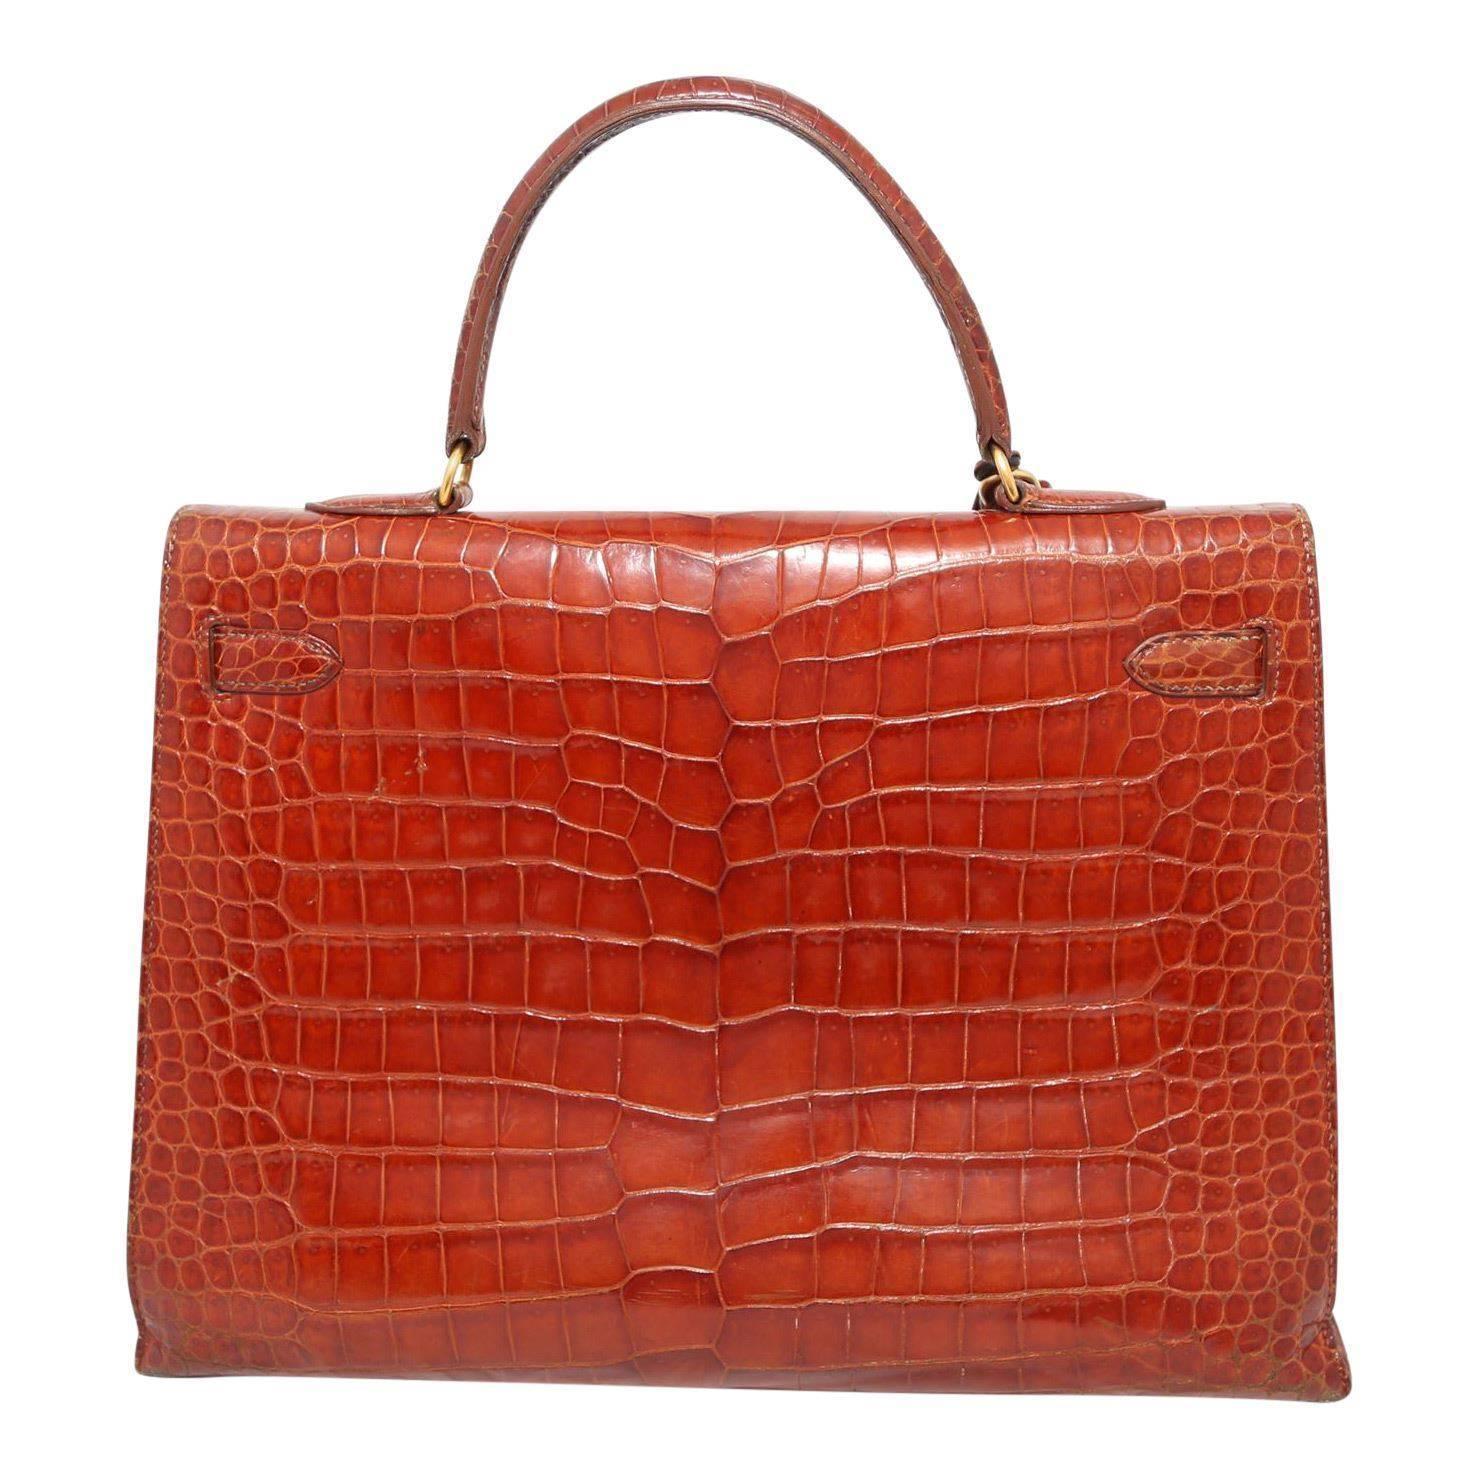 Hermes porous crocodile Kelly bag stamp 1993. gold hardware 

depth 13cm 
height – 26cm 
width - 35cm 

With Working key and lock 

Handle has slight wear 
